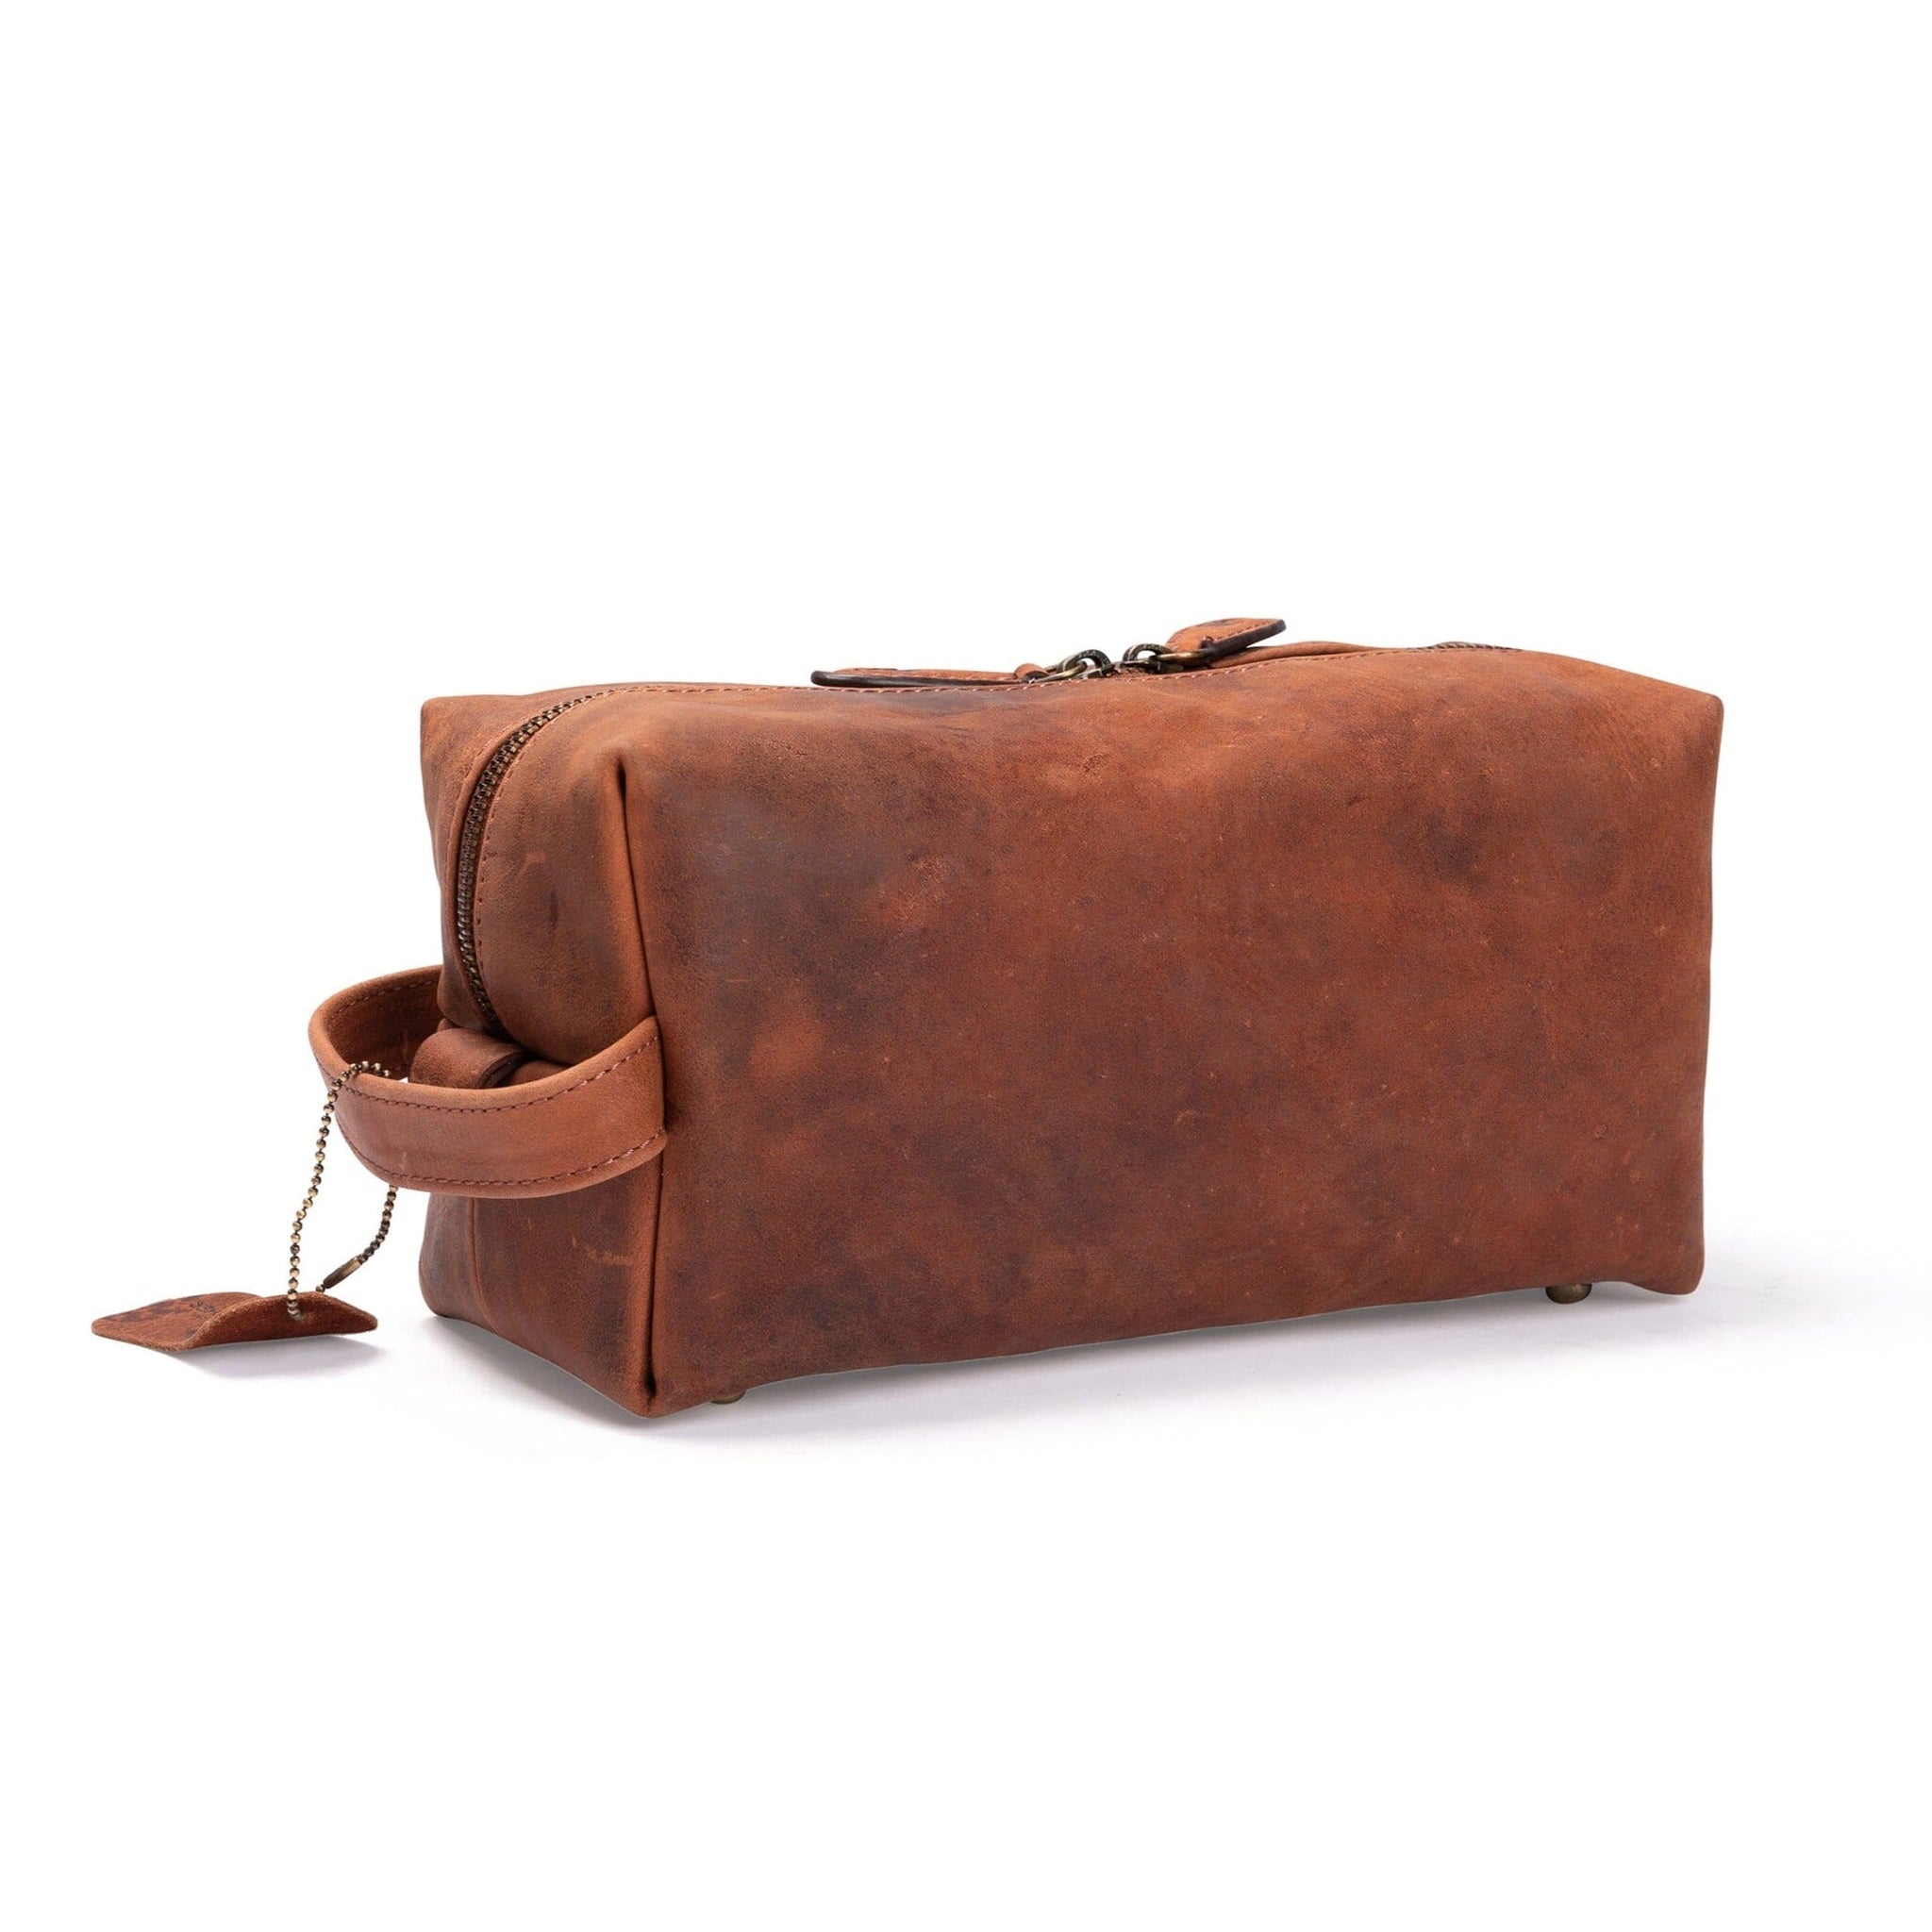 How to Shop for a Leather Toiletry Bag That Keep Your Essential Safe